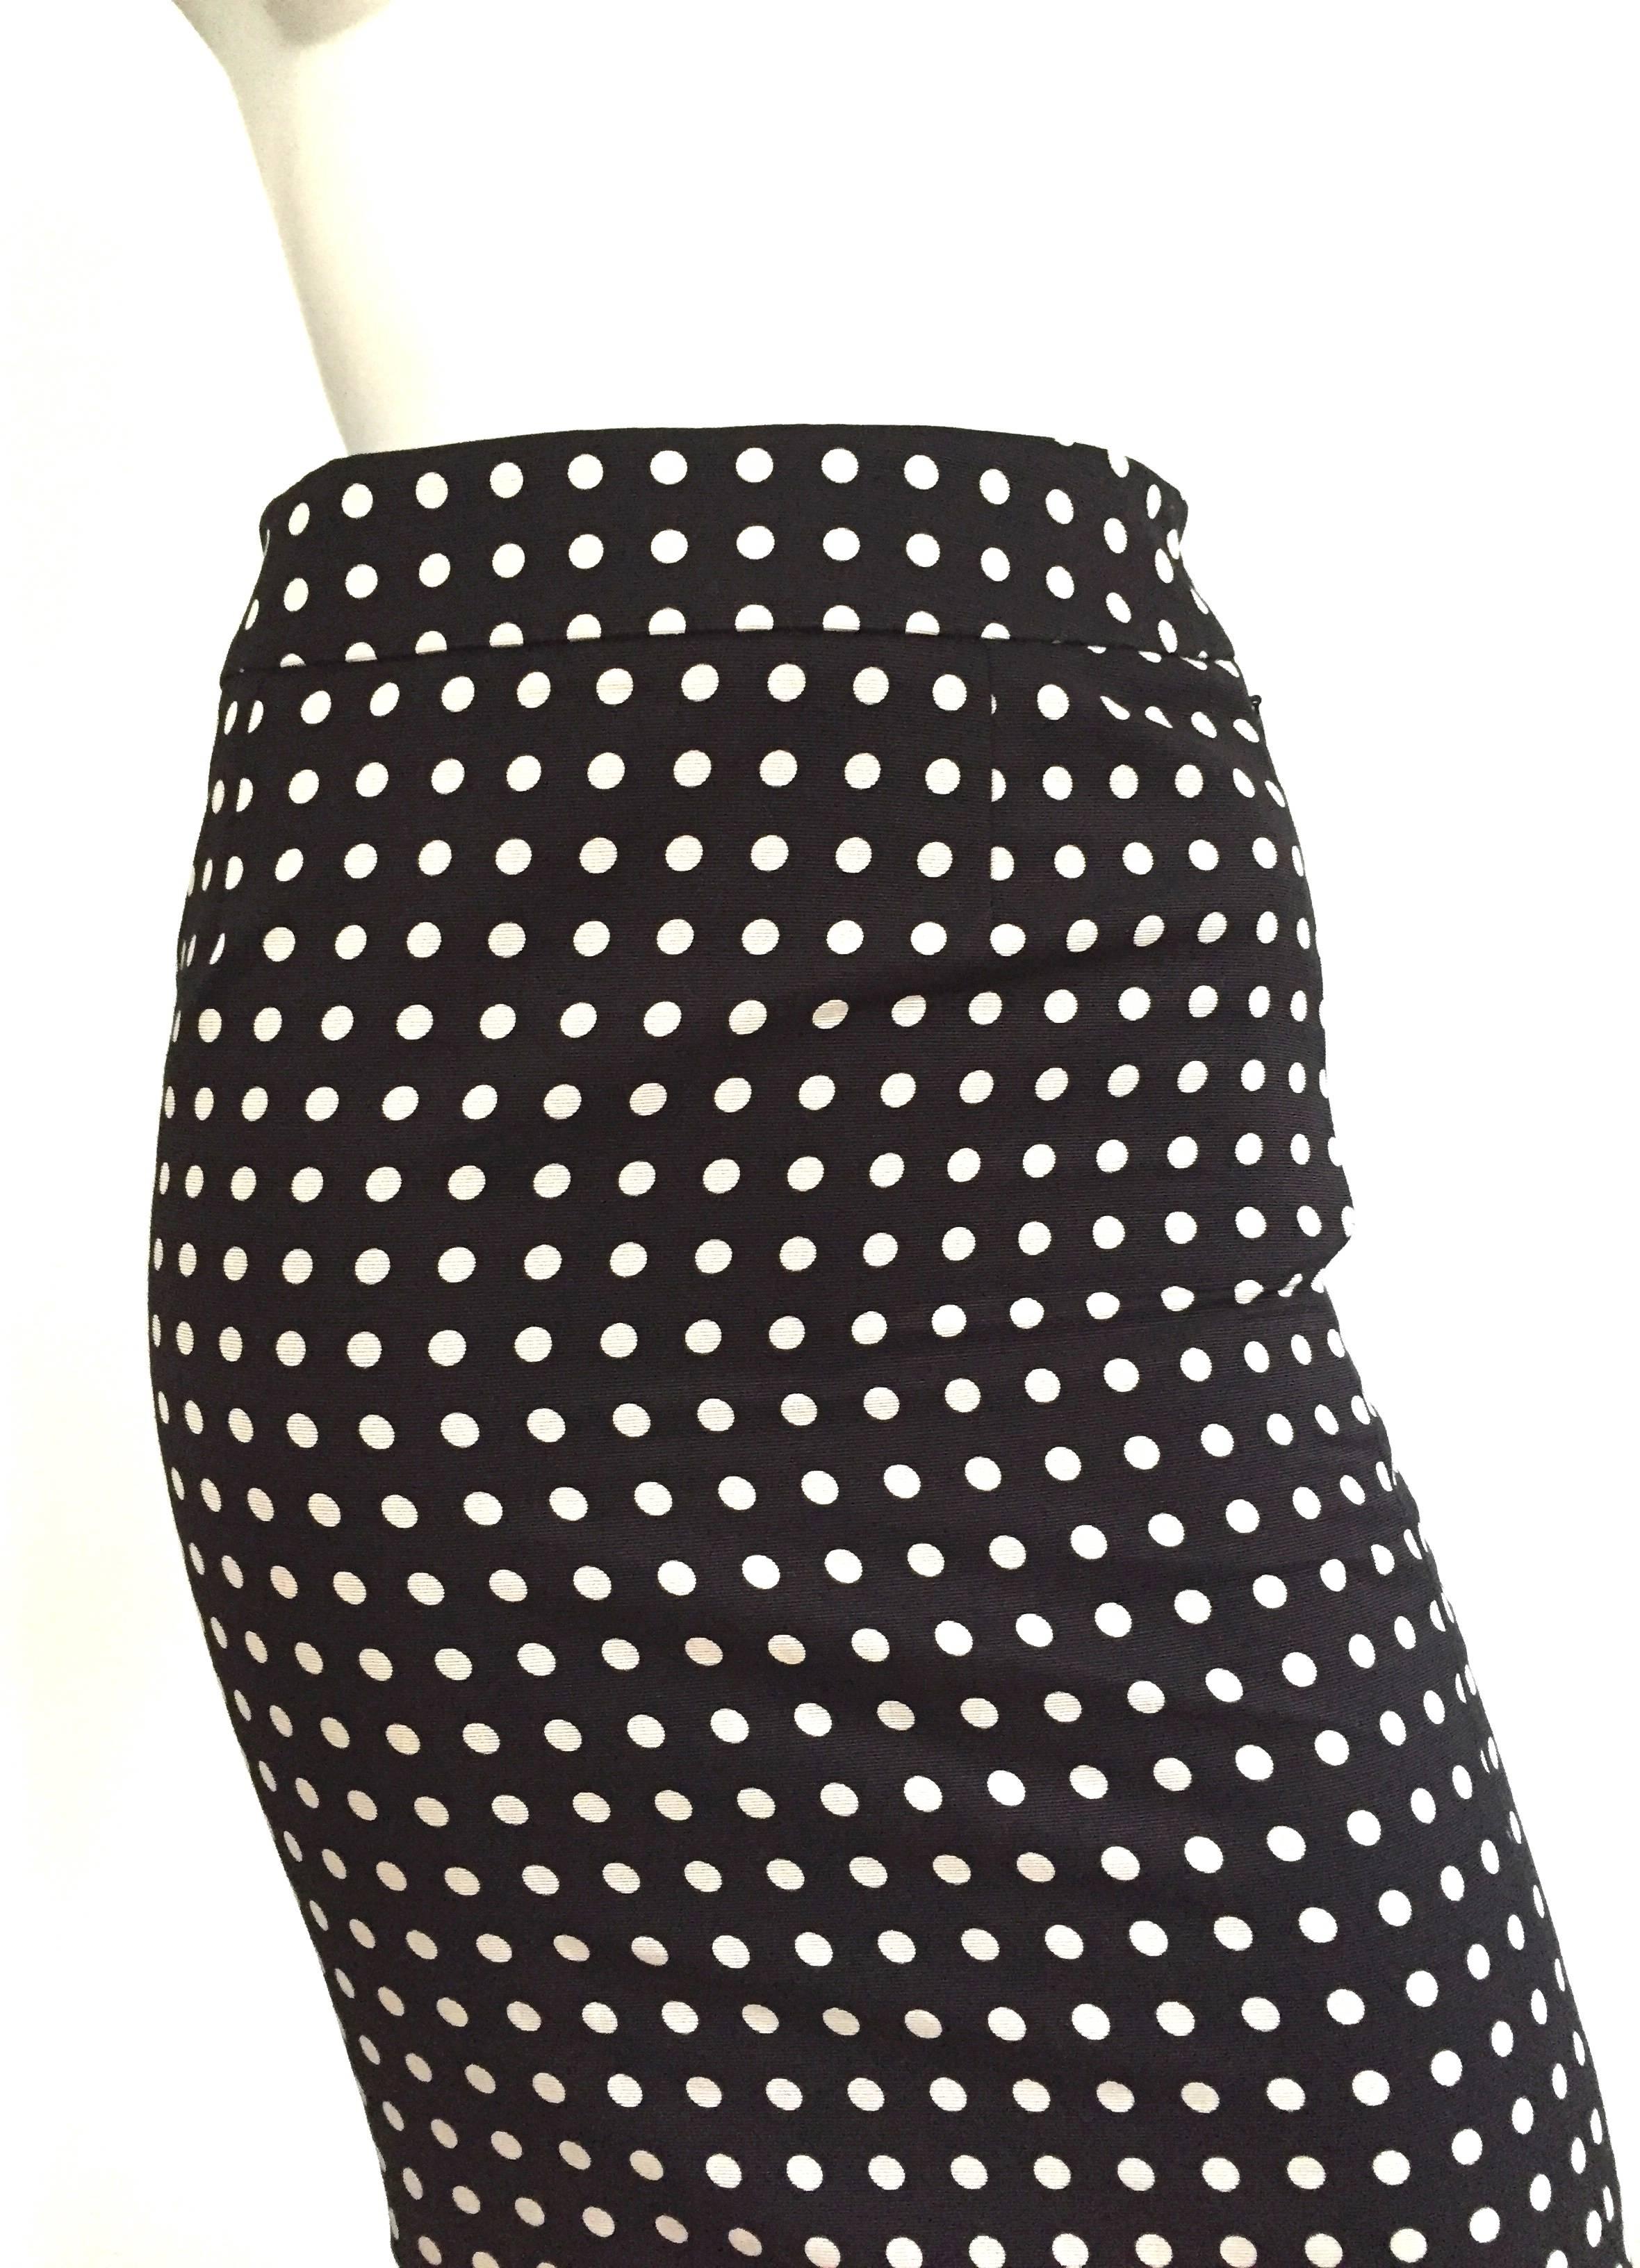 Yves Saint Laurent Rive Gauche polka dot skirt size 4.  Please see & use measurements to properly measure your waist and hips so that this piece will fit your to perfection. The mannequin is a size 4 and this YSL skirt was a very tight fit. Skirt is